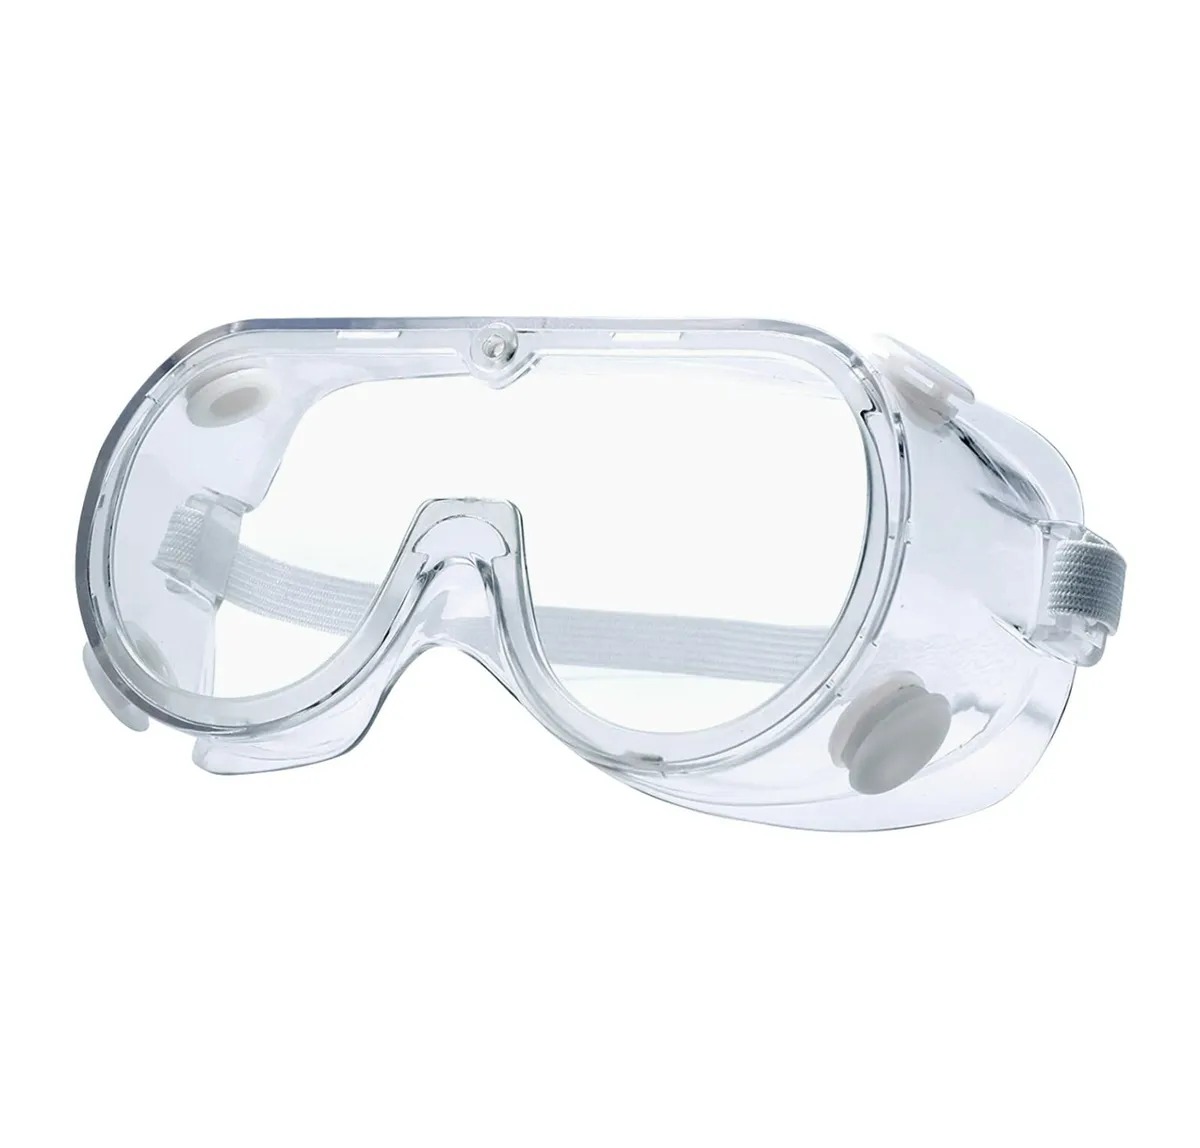 Clear Vision, Ultimate Protection: The Complete Guide to Safety Goggles in Canada